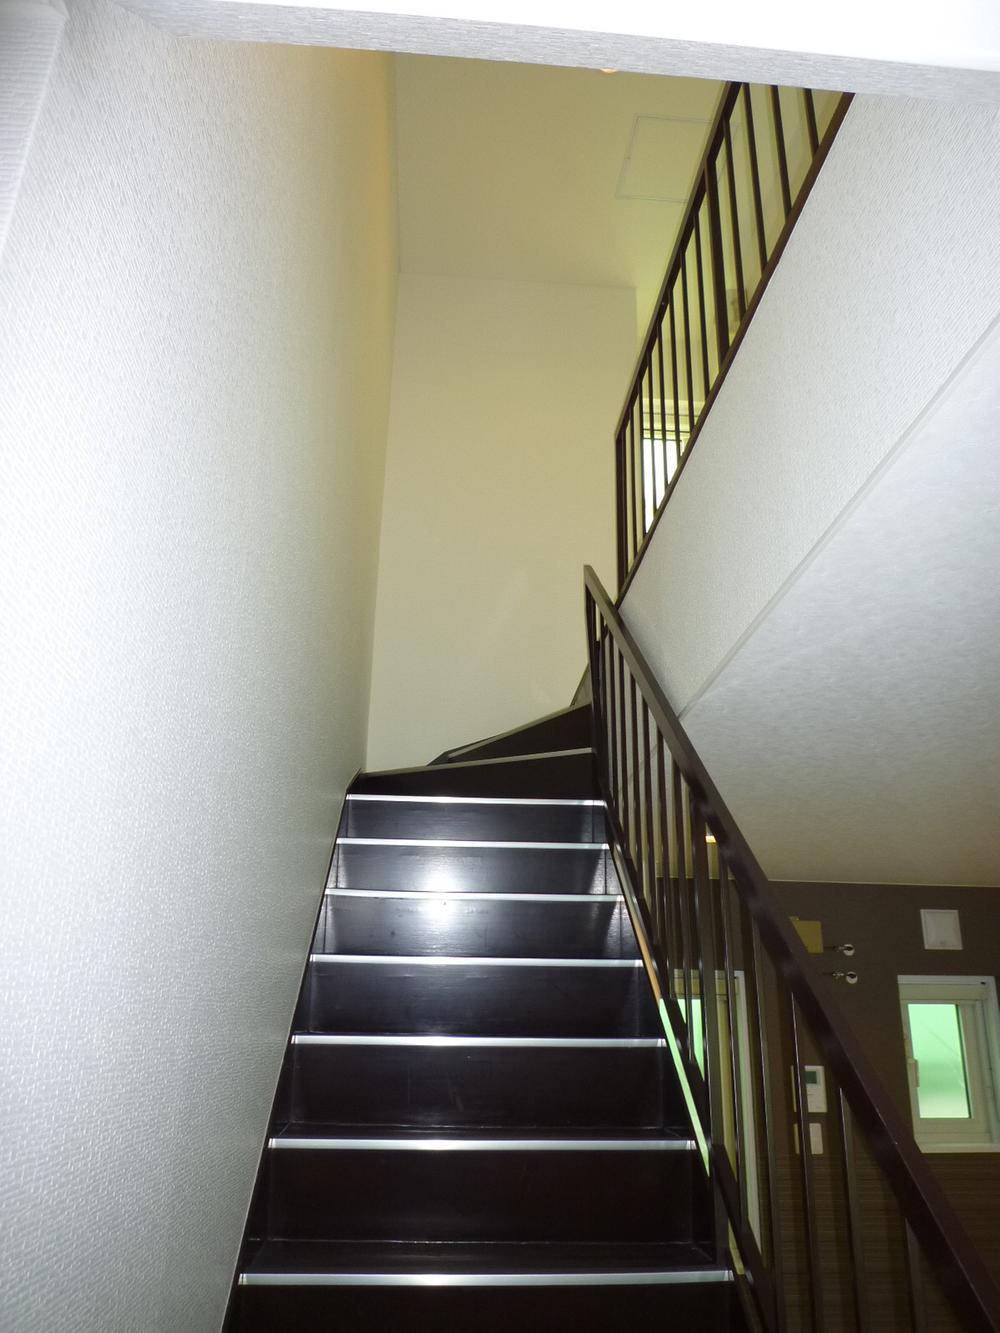 Other introspection. Indoor (stairs)